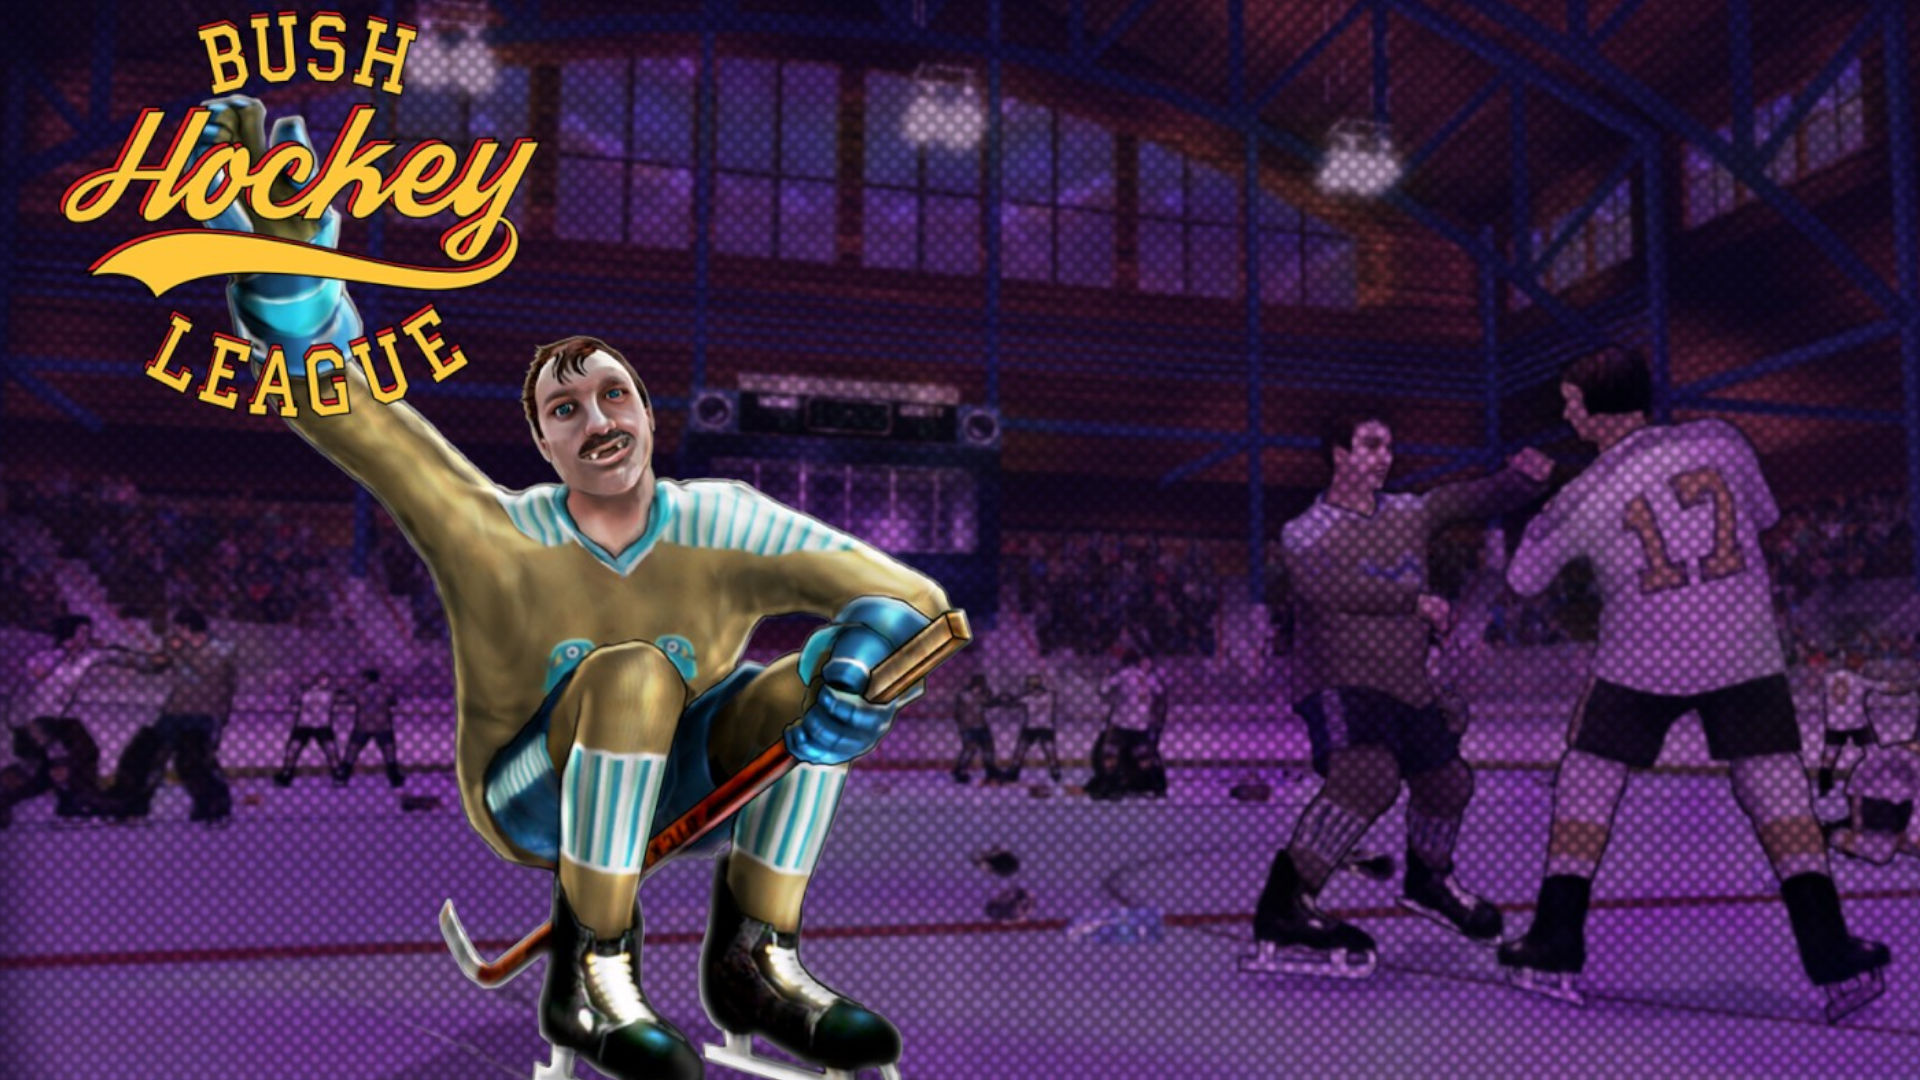 Cover art for Bush League Hockey, one of the more brutal arcade style hockey games